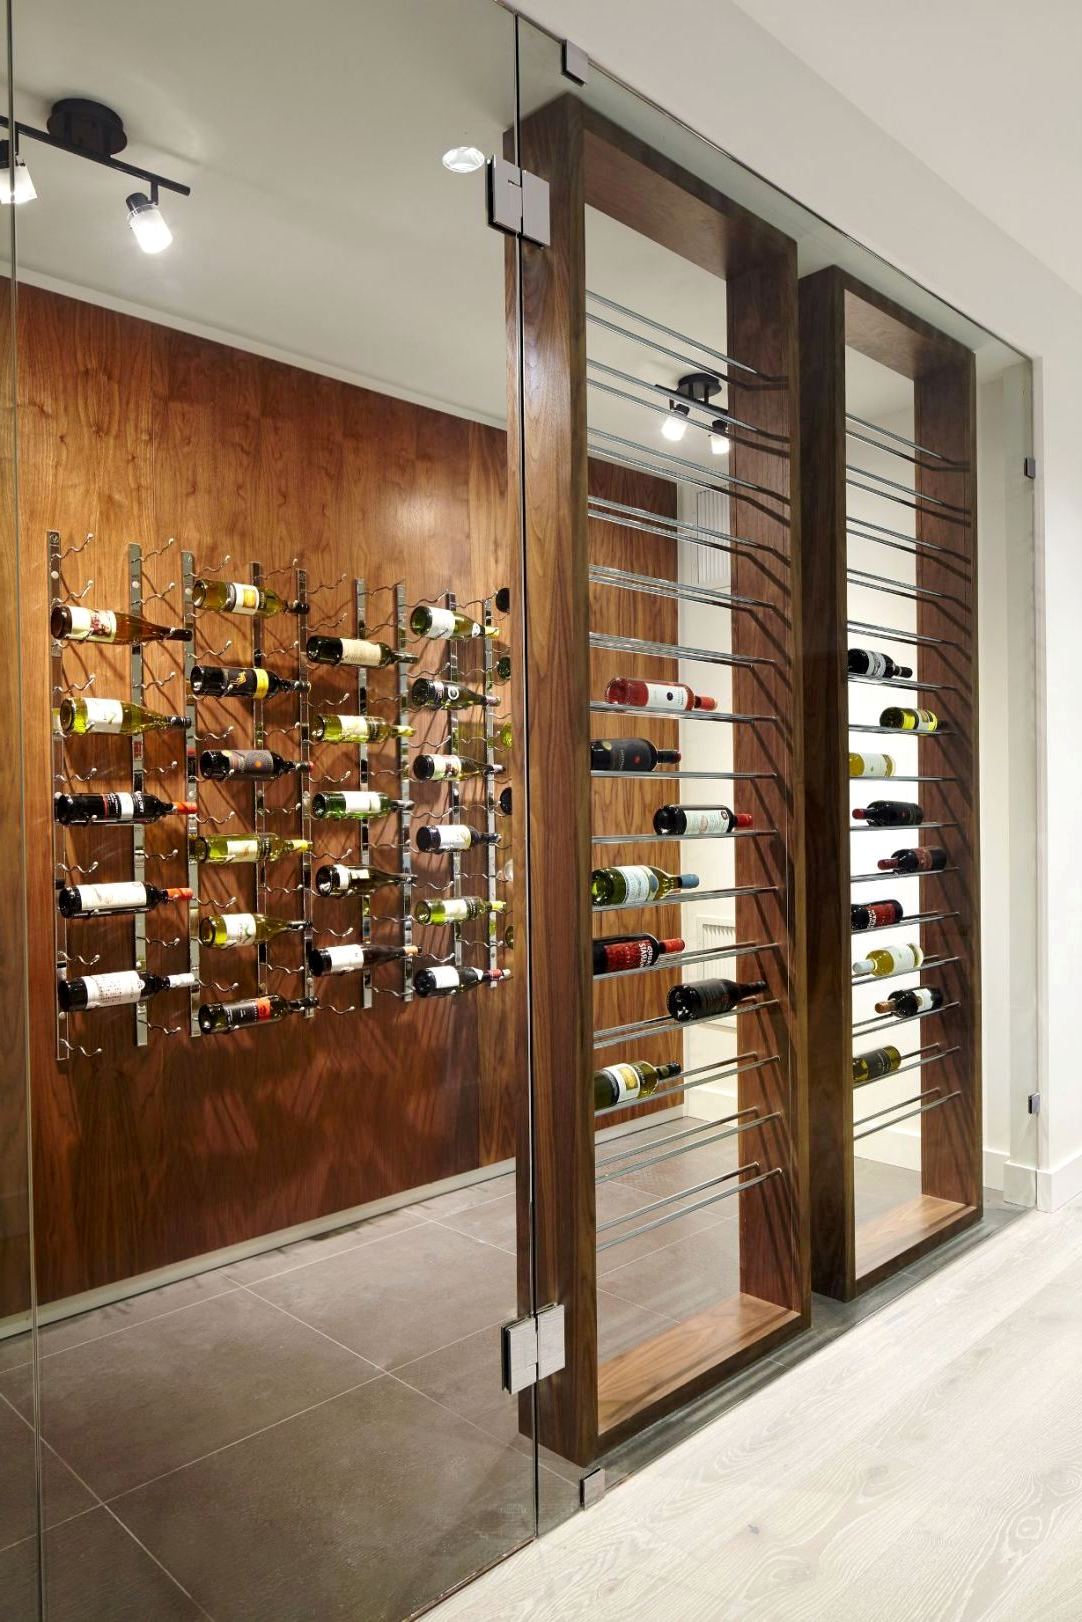 Customized Wine Rack Design Created by an Austin Builder for a Residential Property